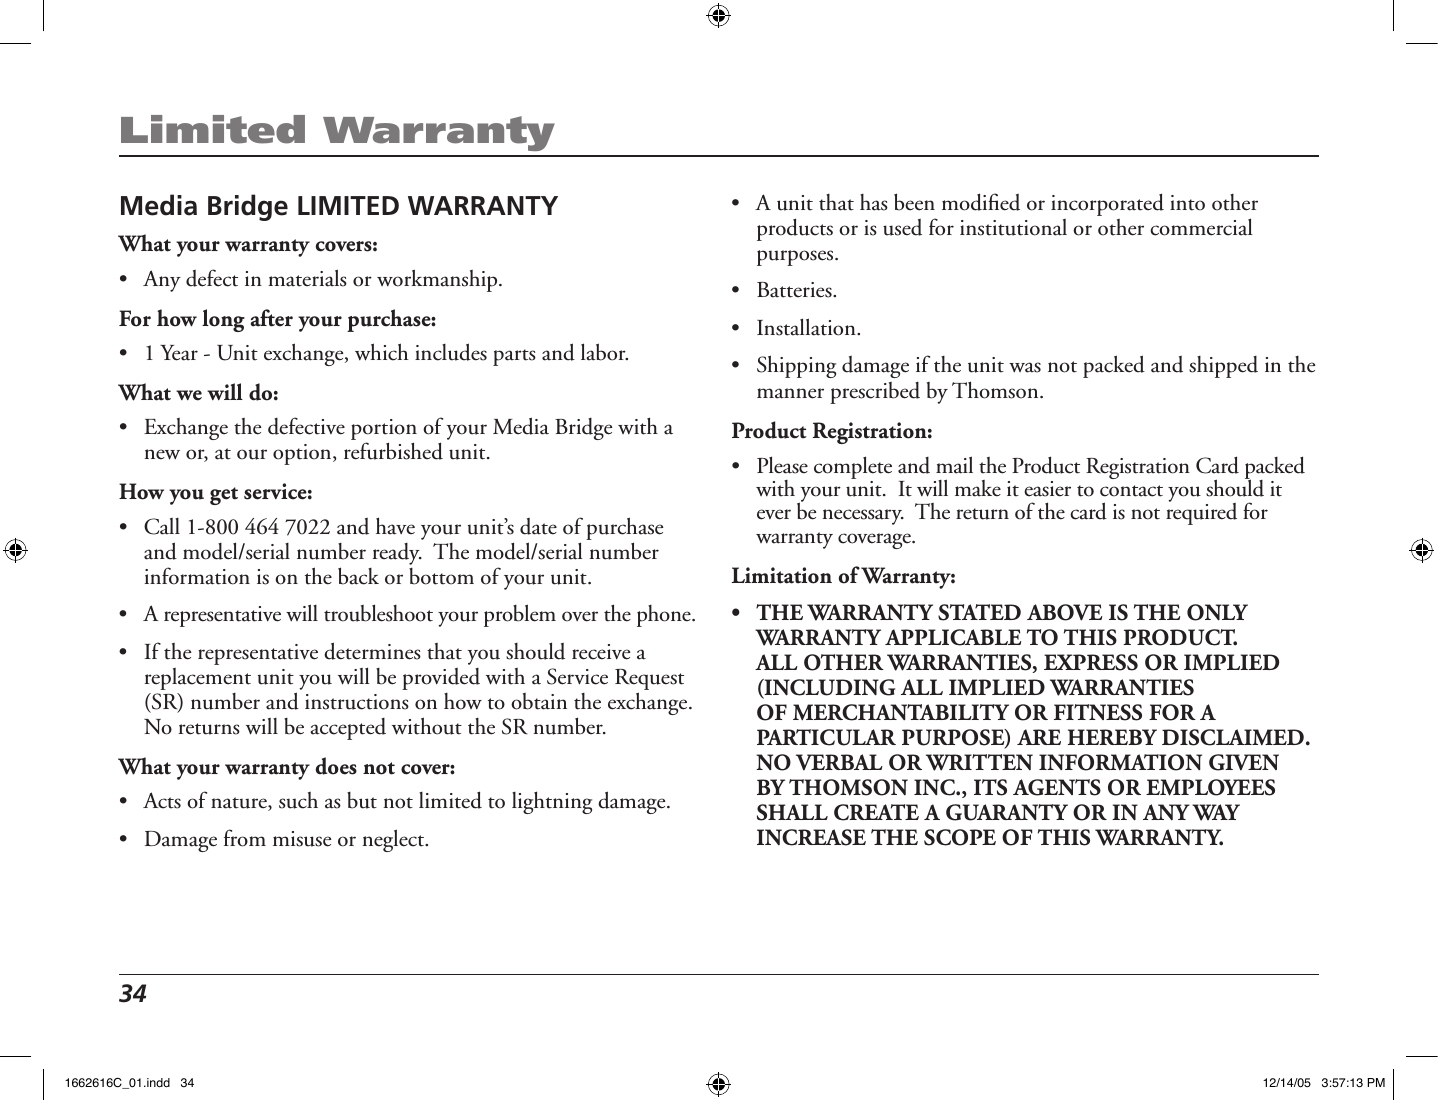 34 Limited WarrantyMedia Bridge LIMITED WARRANTYWhat your warranty covers:•  Any defect in materials or workmanship.For how long after your purchase:•  1 Year - Unit exchange, which includes parts and labor.What we will do:•  Exchange the defective portion of your Media Bridge with a new or, at our option, refurbished unit. How you get service:•  Call 1-800 464 7022 and have your unit’s date of purchase and model/serial number ready.  The model/serial number information is on the back or bottom of your unit.•  A representative will troubleshoot your problem over the phone. •  If the representative determines that you should receive a replacement unit you will be provided with a Service Request (SR) number and instructions on how to obtain the exchange.  No returns will be accepted without the SR number.What your warranty does not cover:•  Acts of nature, such as but not limited to lightning damage.•  Damage from misuse or neglect.•  A unit that has been modiﬁed or incorporated into other products or is used for institutional or other commercial purposes. •  Batteries. •  Installation.•  Shipping damage if the unit was not packed and shipped in the manner prescribed by Thomson.Product Registration:•   Please complete and mail the Product Registration Card packed with your unit.  It will make it easier to contact you should it ever be necessary.  The return of the card is not required for warranty coverage.Limitation of Warranty:•   THE WARRANTY STATED ABOVE IS THE ONLY WARRANTY APPLICABLE TO THIS PRODUCT.  ALL OTHER WARRANTIES, EXPRESS OR IMPLIED (INCLUDING ALL IMPLIED WARRANTIES OF MERCHANTABILITY OR FITNESS FOR A PARTICULAR PURPOSE) ARE HEREBY DISCLAIMED.  NO VERBAL OR WRITTEN INFORMATION GIVEN BY THOMSON INC., ITS AGENTS OR EMPLOYEES SHALL CREATE A GUARANTY OR IN ANY WAY INCREASE THE SCOPE OF THIS WARRANTY.  1662616C_01.indd   34 12/14/05   3:57:13 PM